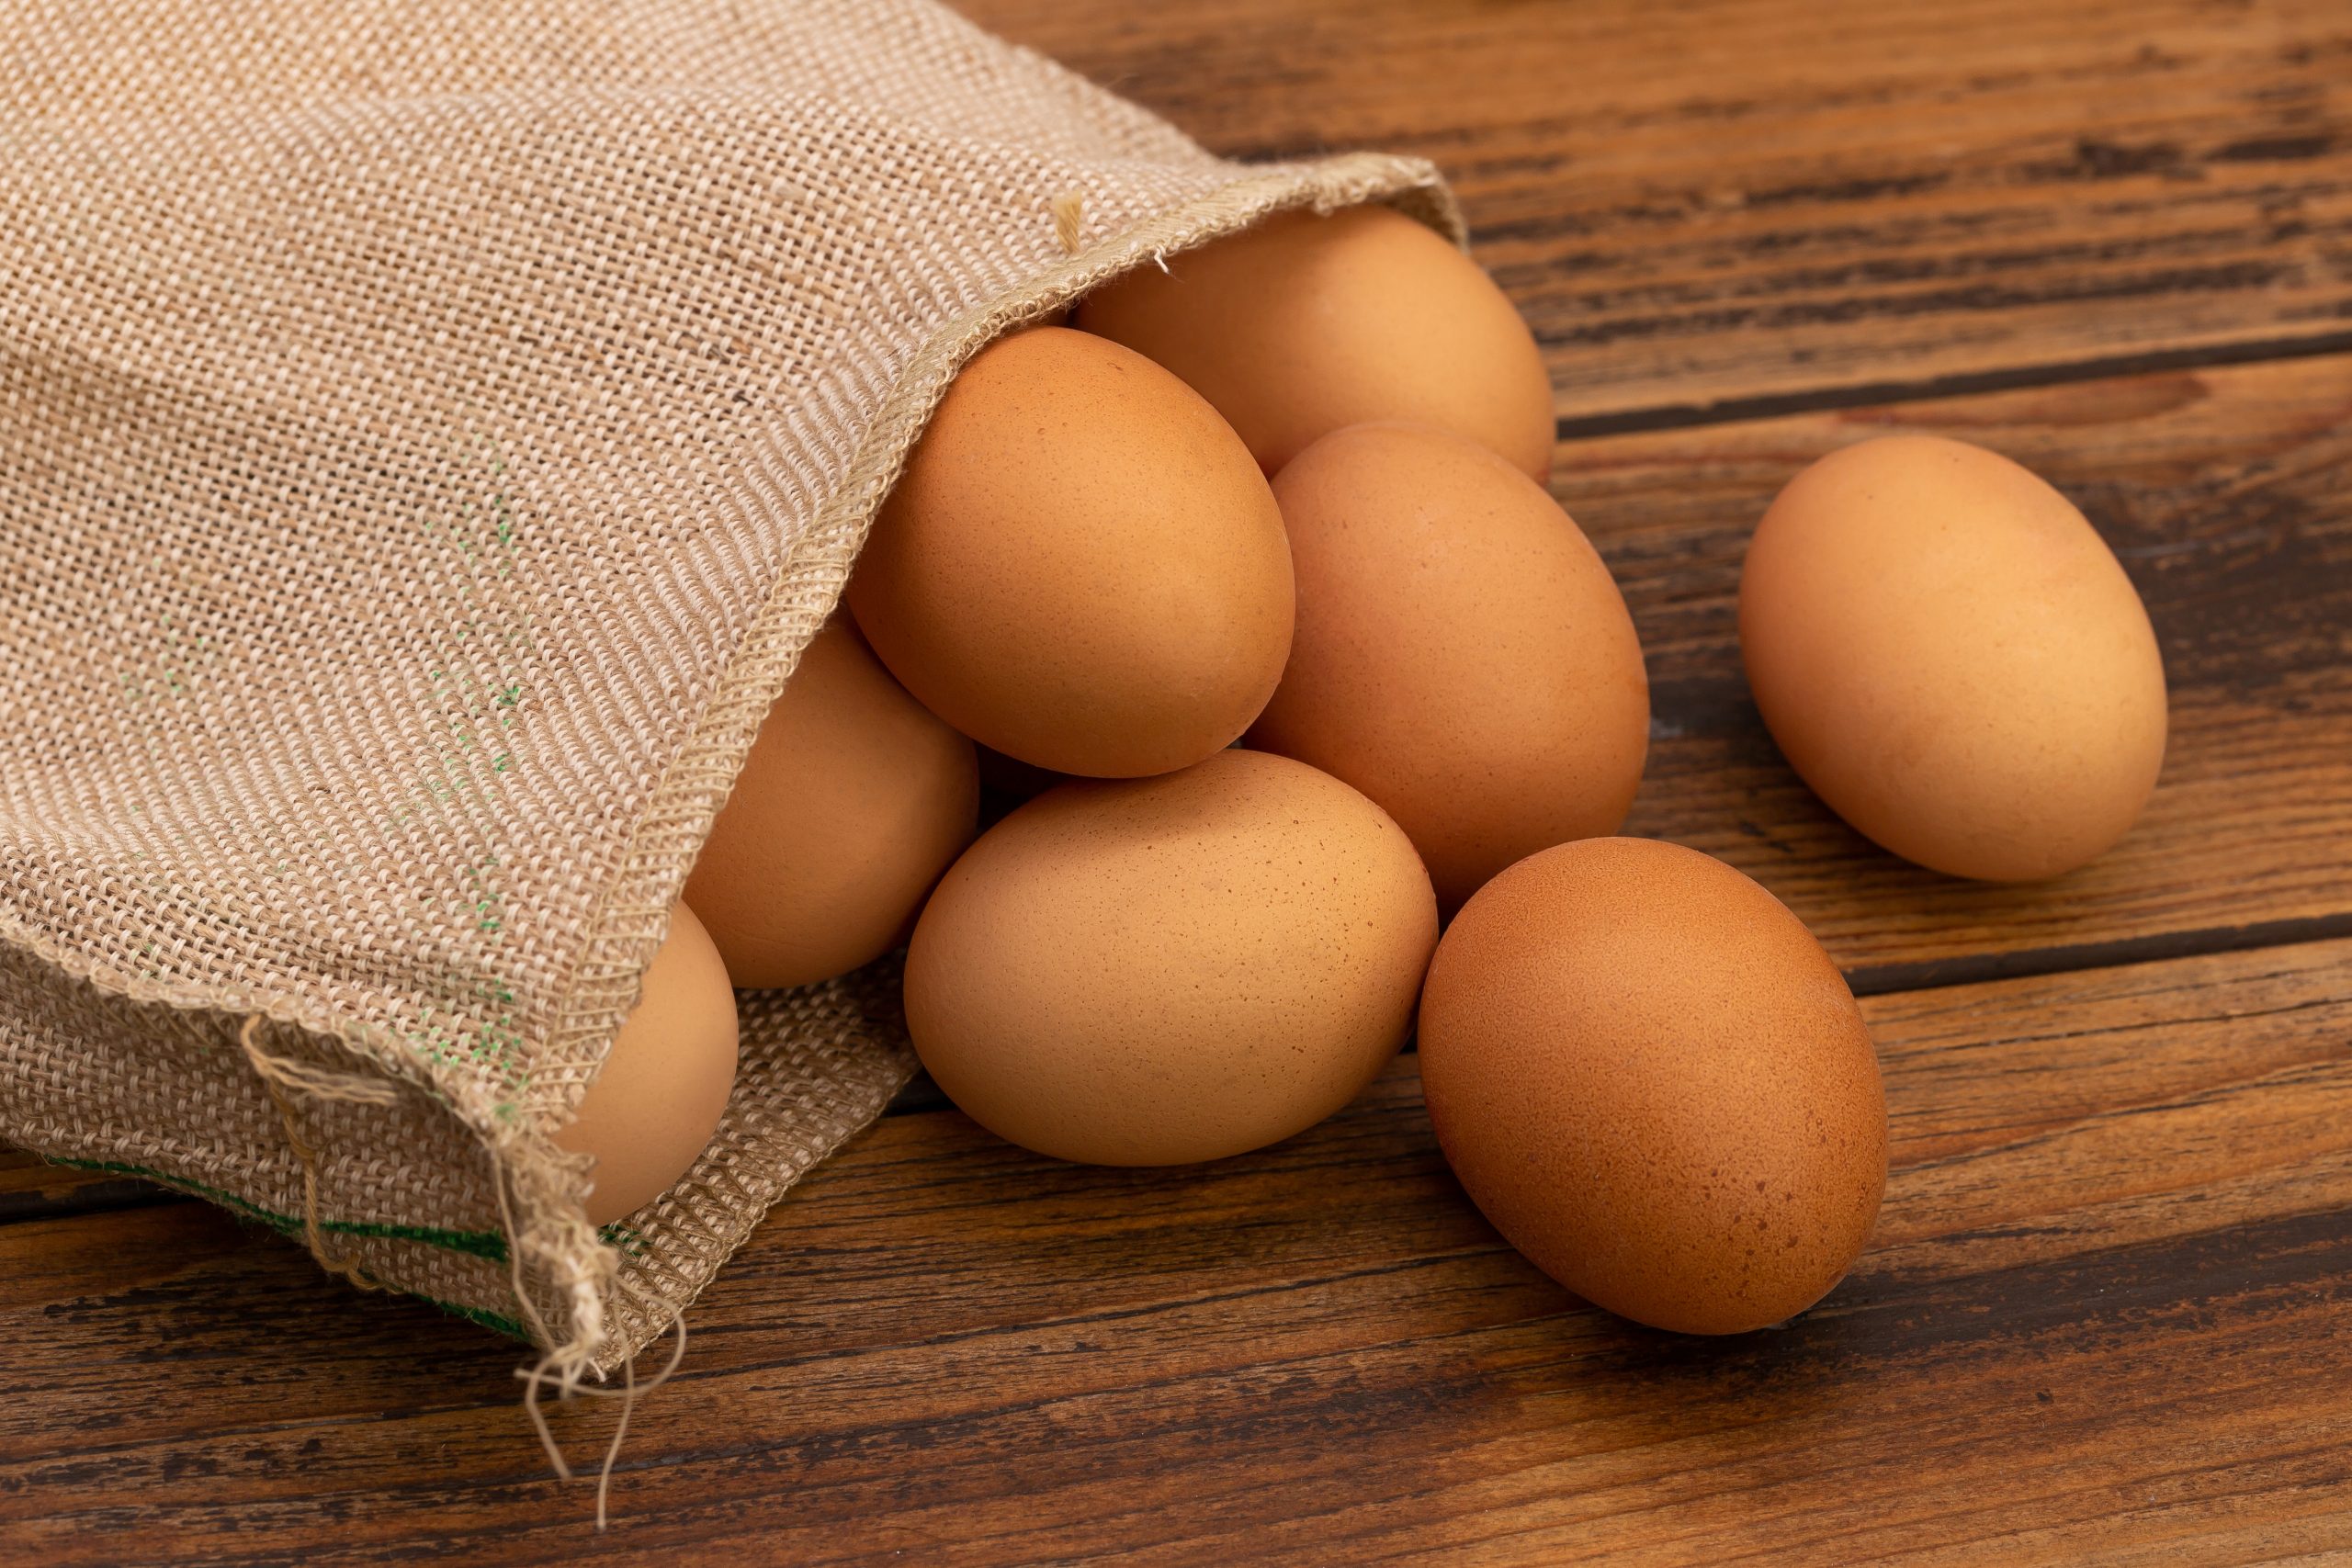 Truth about eggs and cholesterol